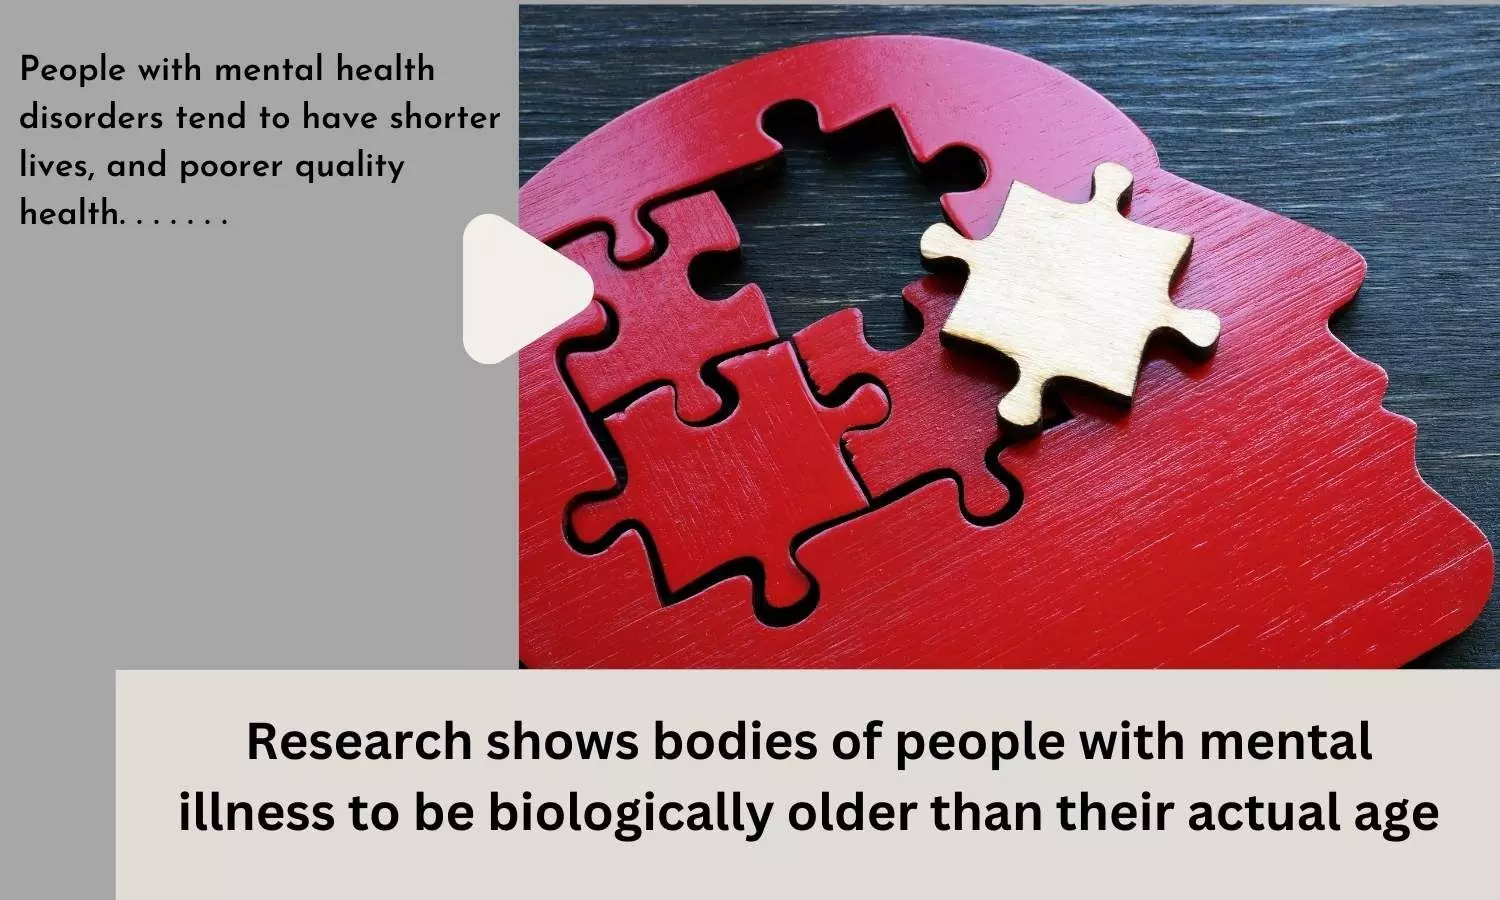 Research shows bodies of people with mental illness to be biologically older than their actual age